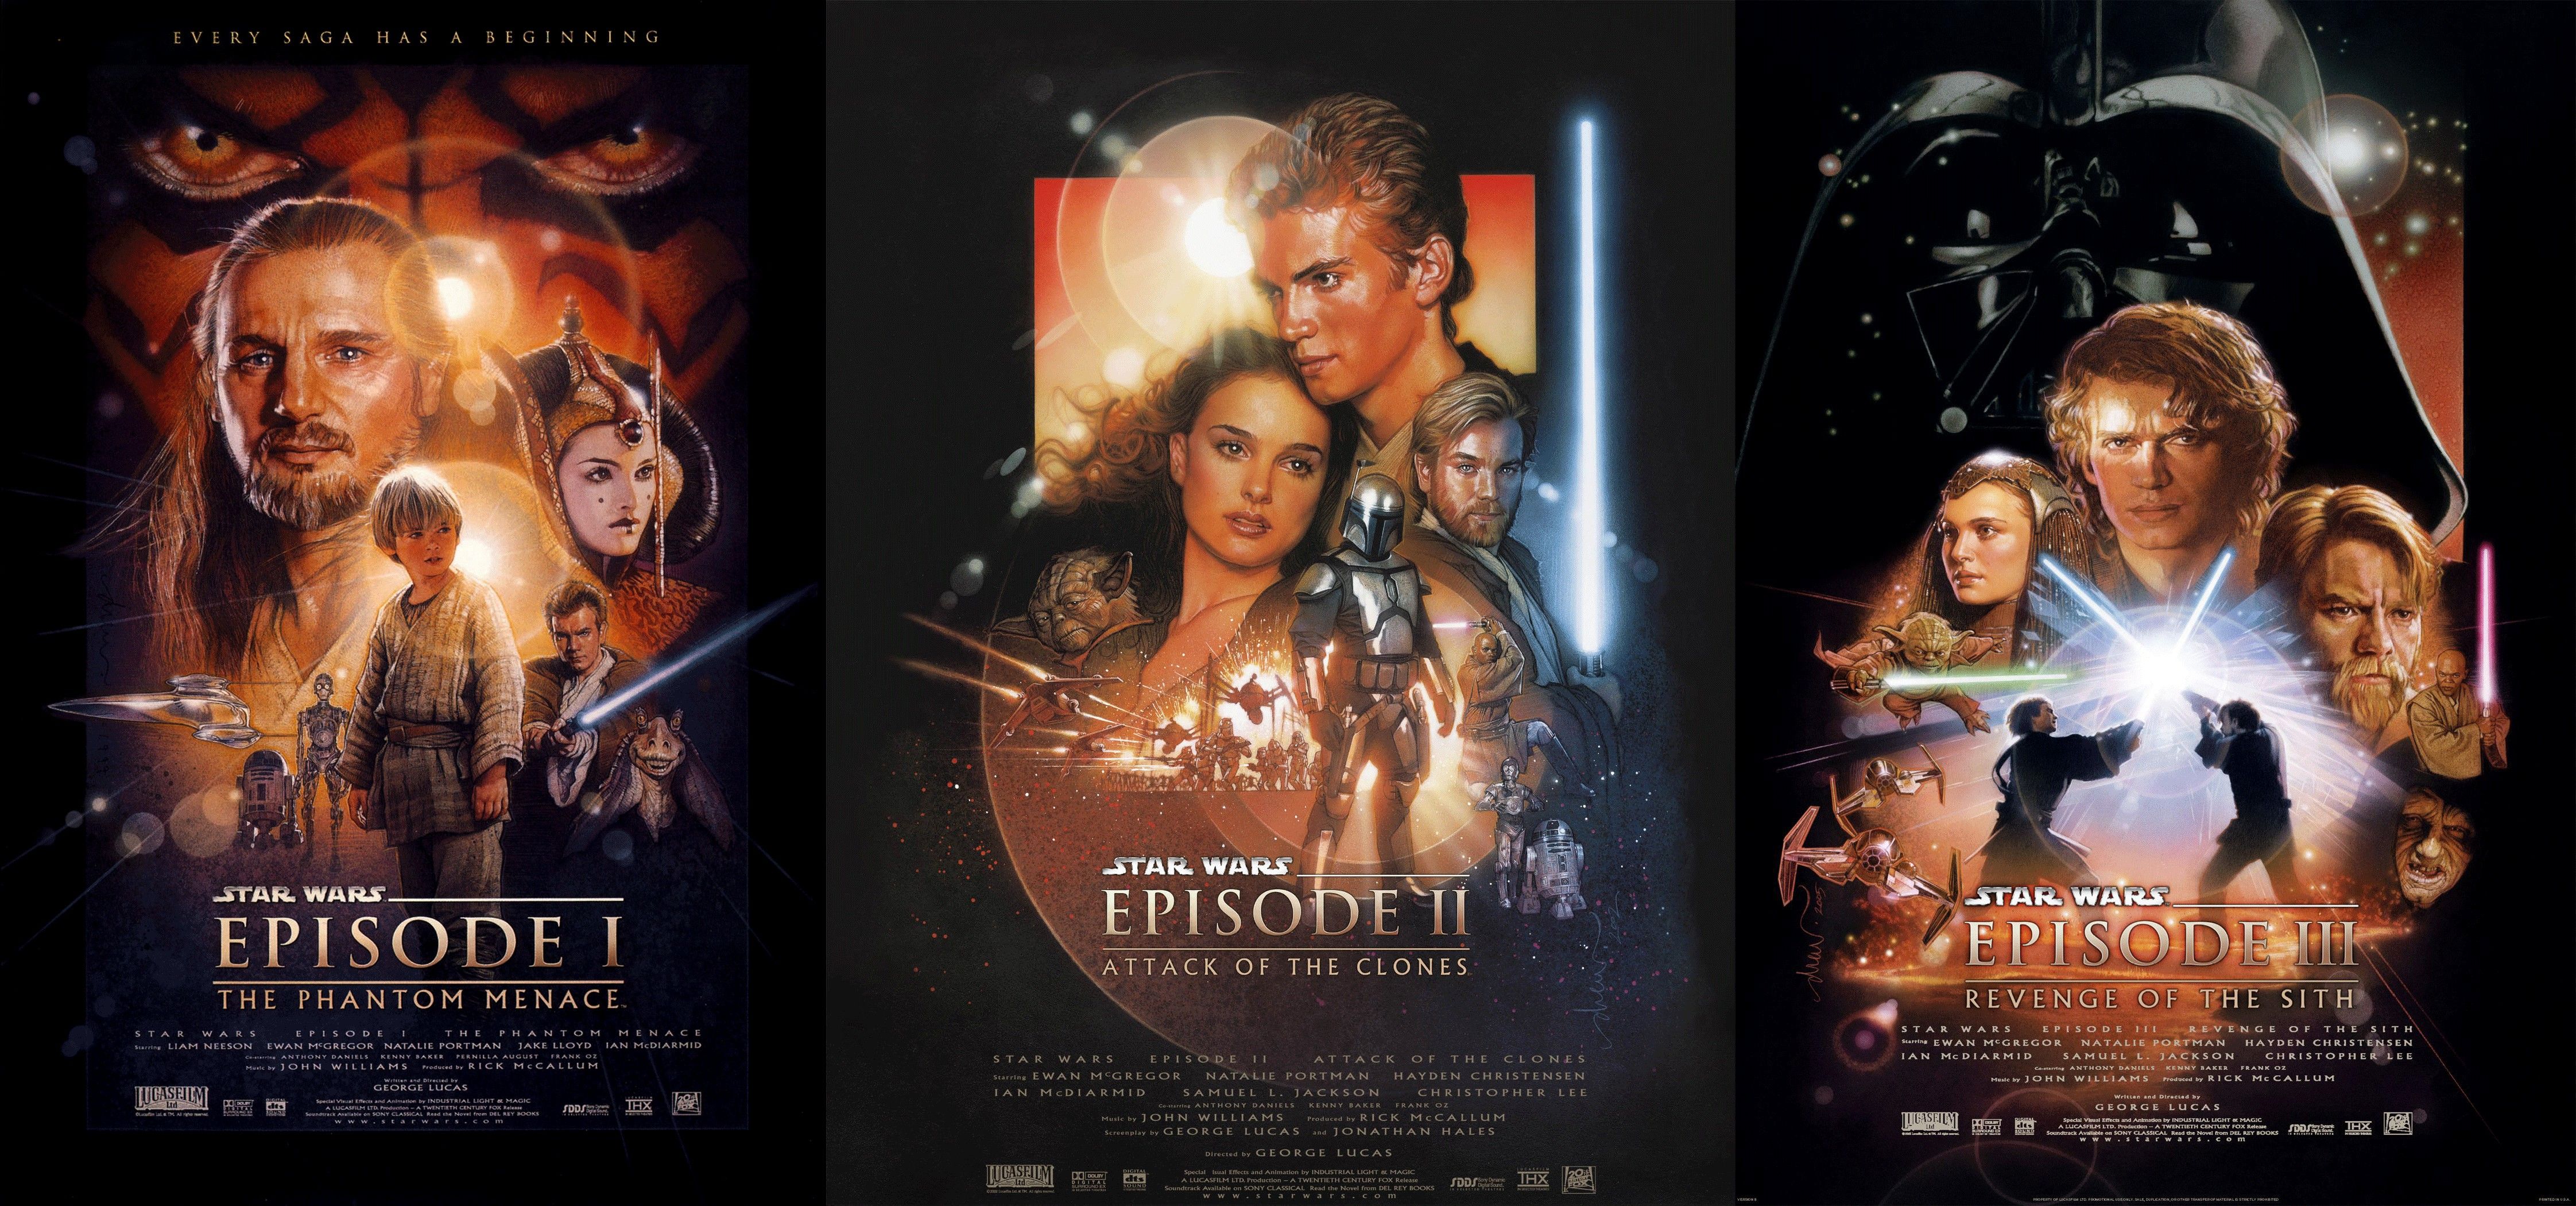 Star Wars Trilogy Wallpapers - Wallpaper Cave